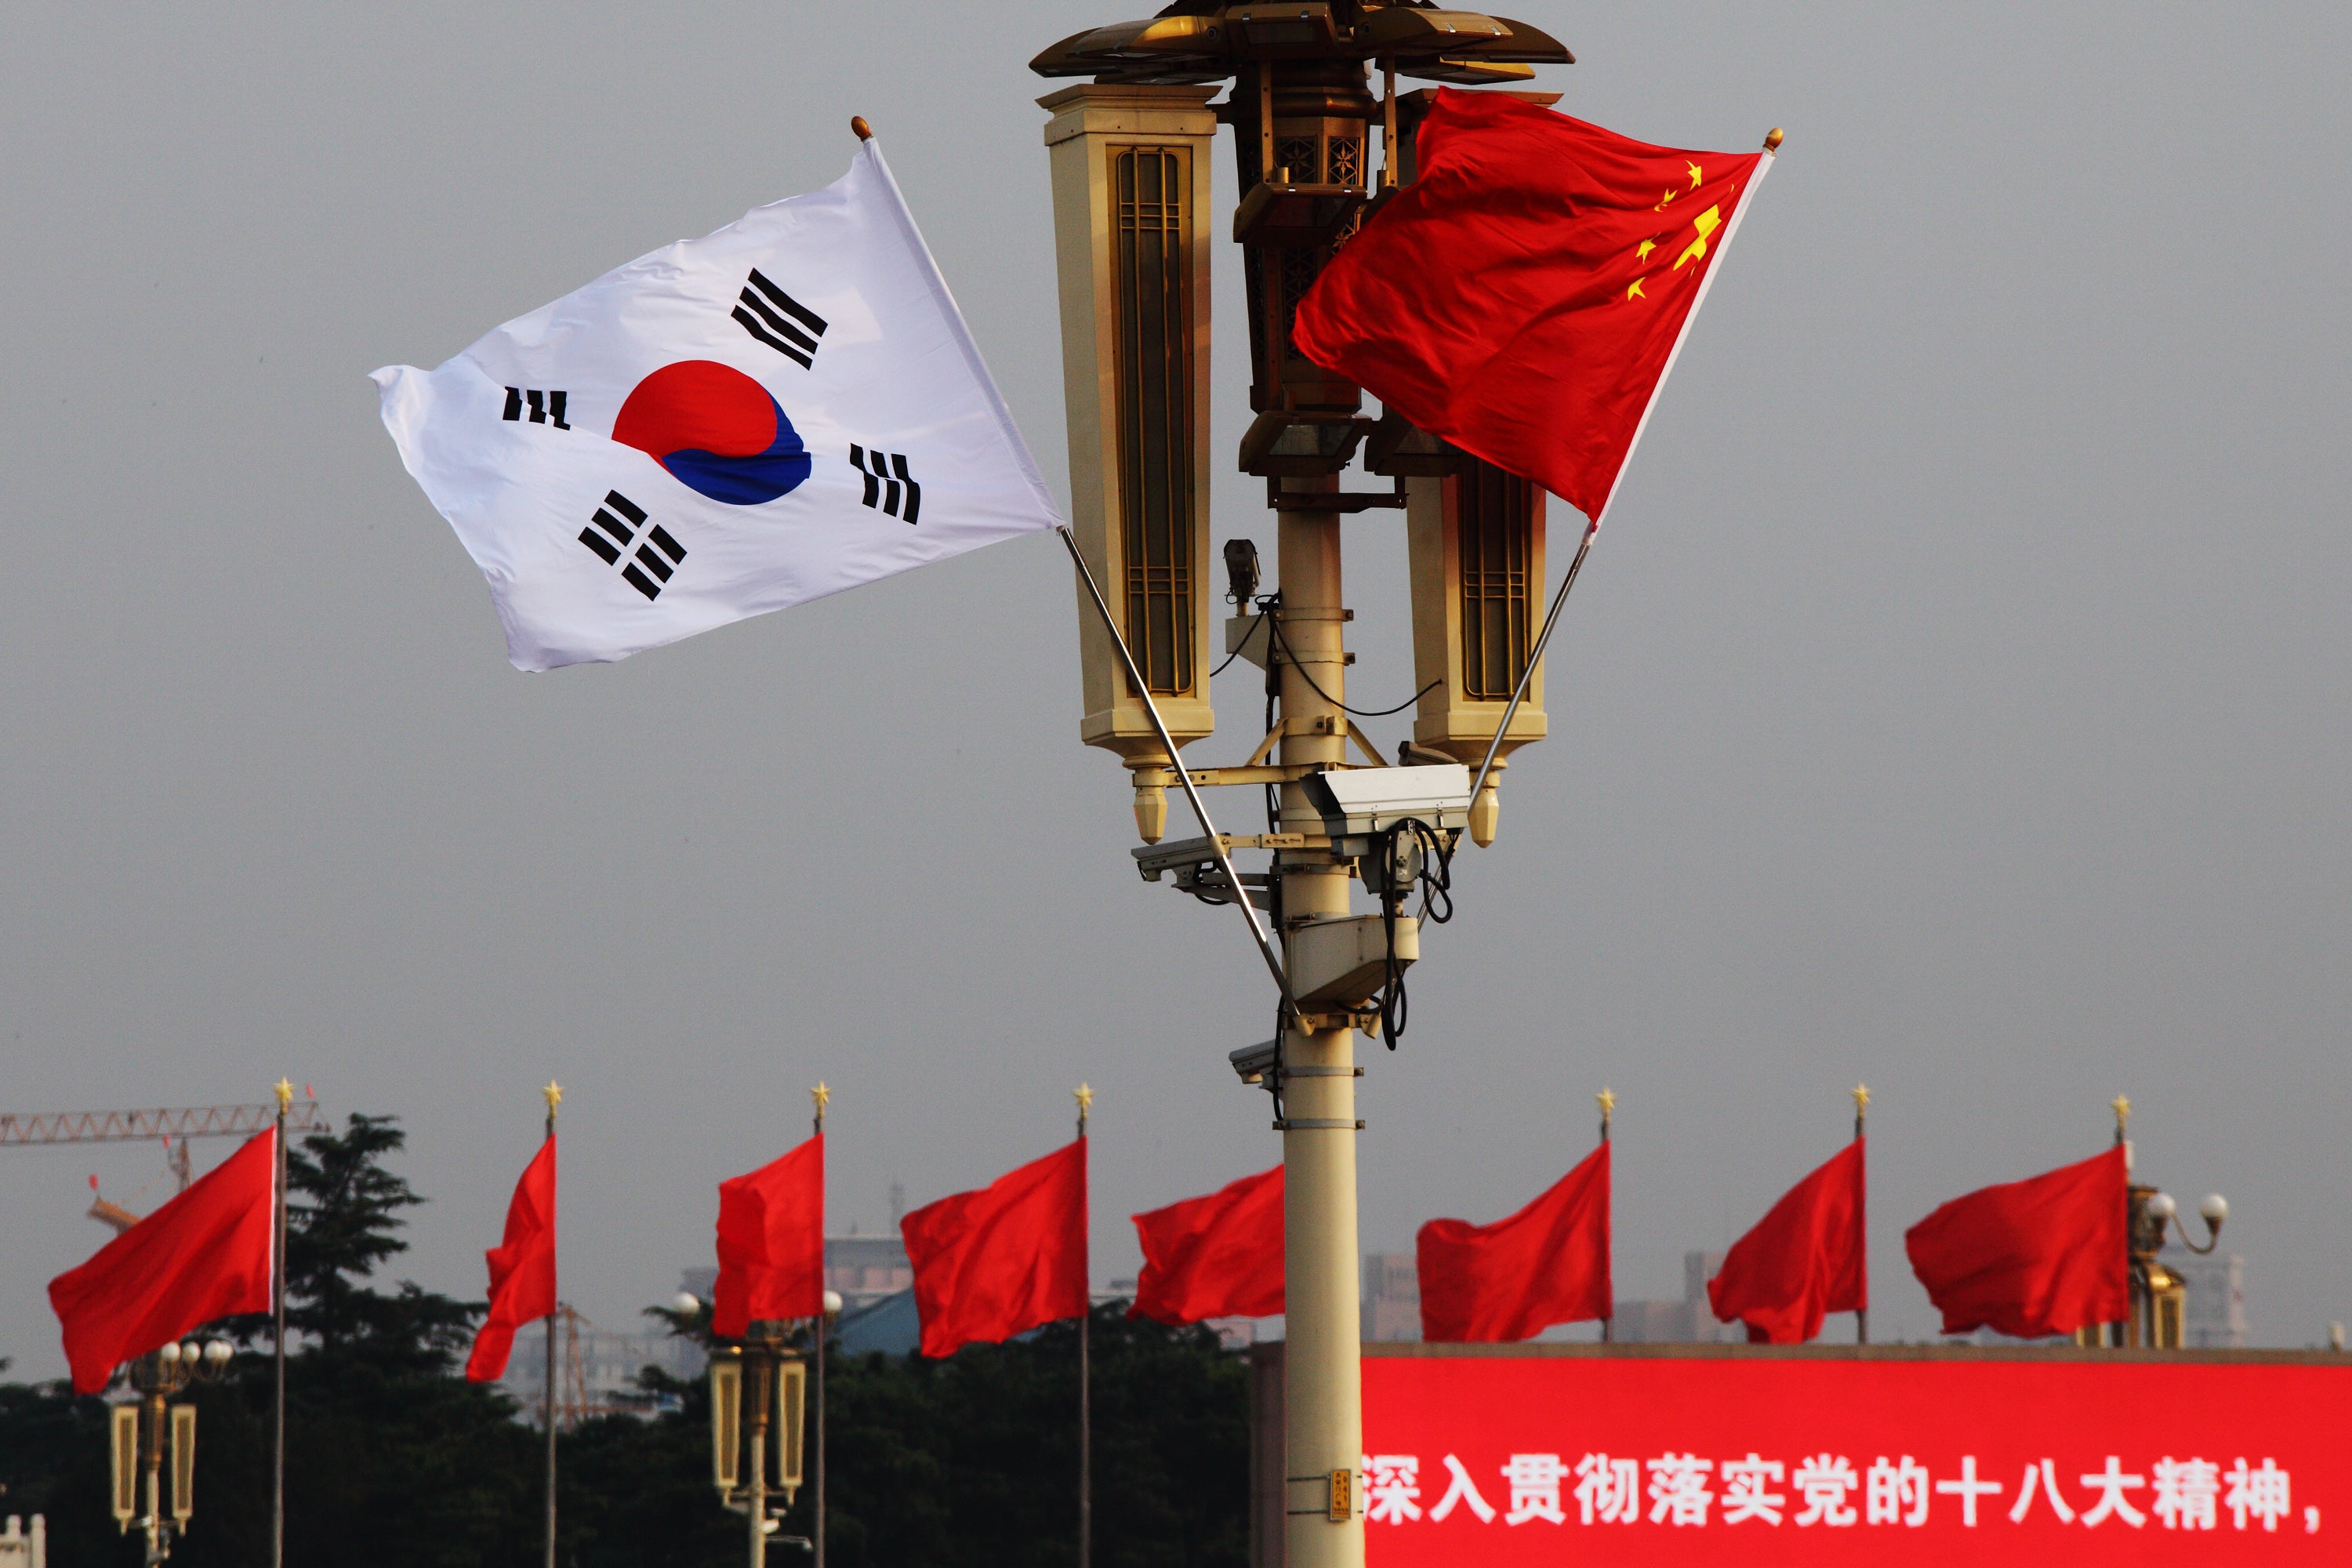 Chinese and South Korean flags flutter in front of Tiananmen Rostrum in Beijing